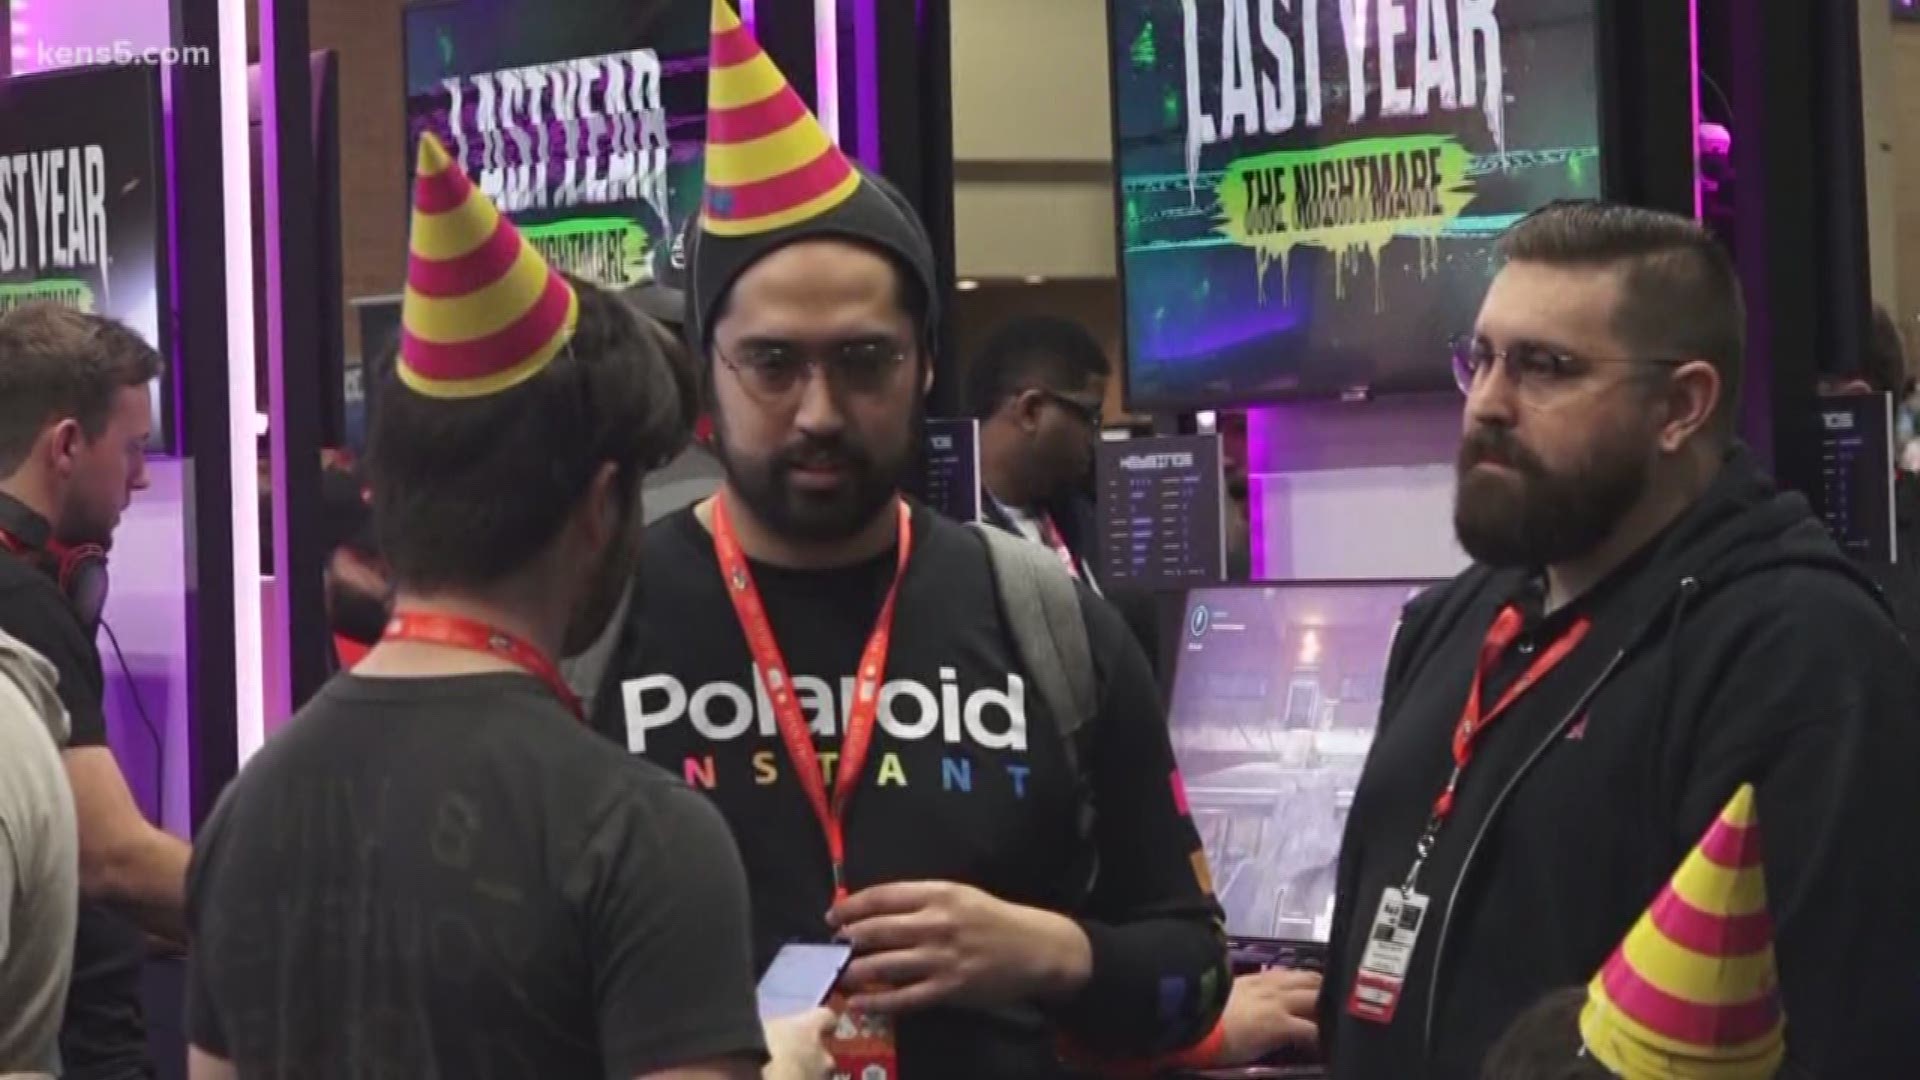 Today marks the beginning of the annual PAX South gaming convention.